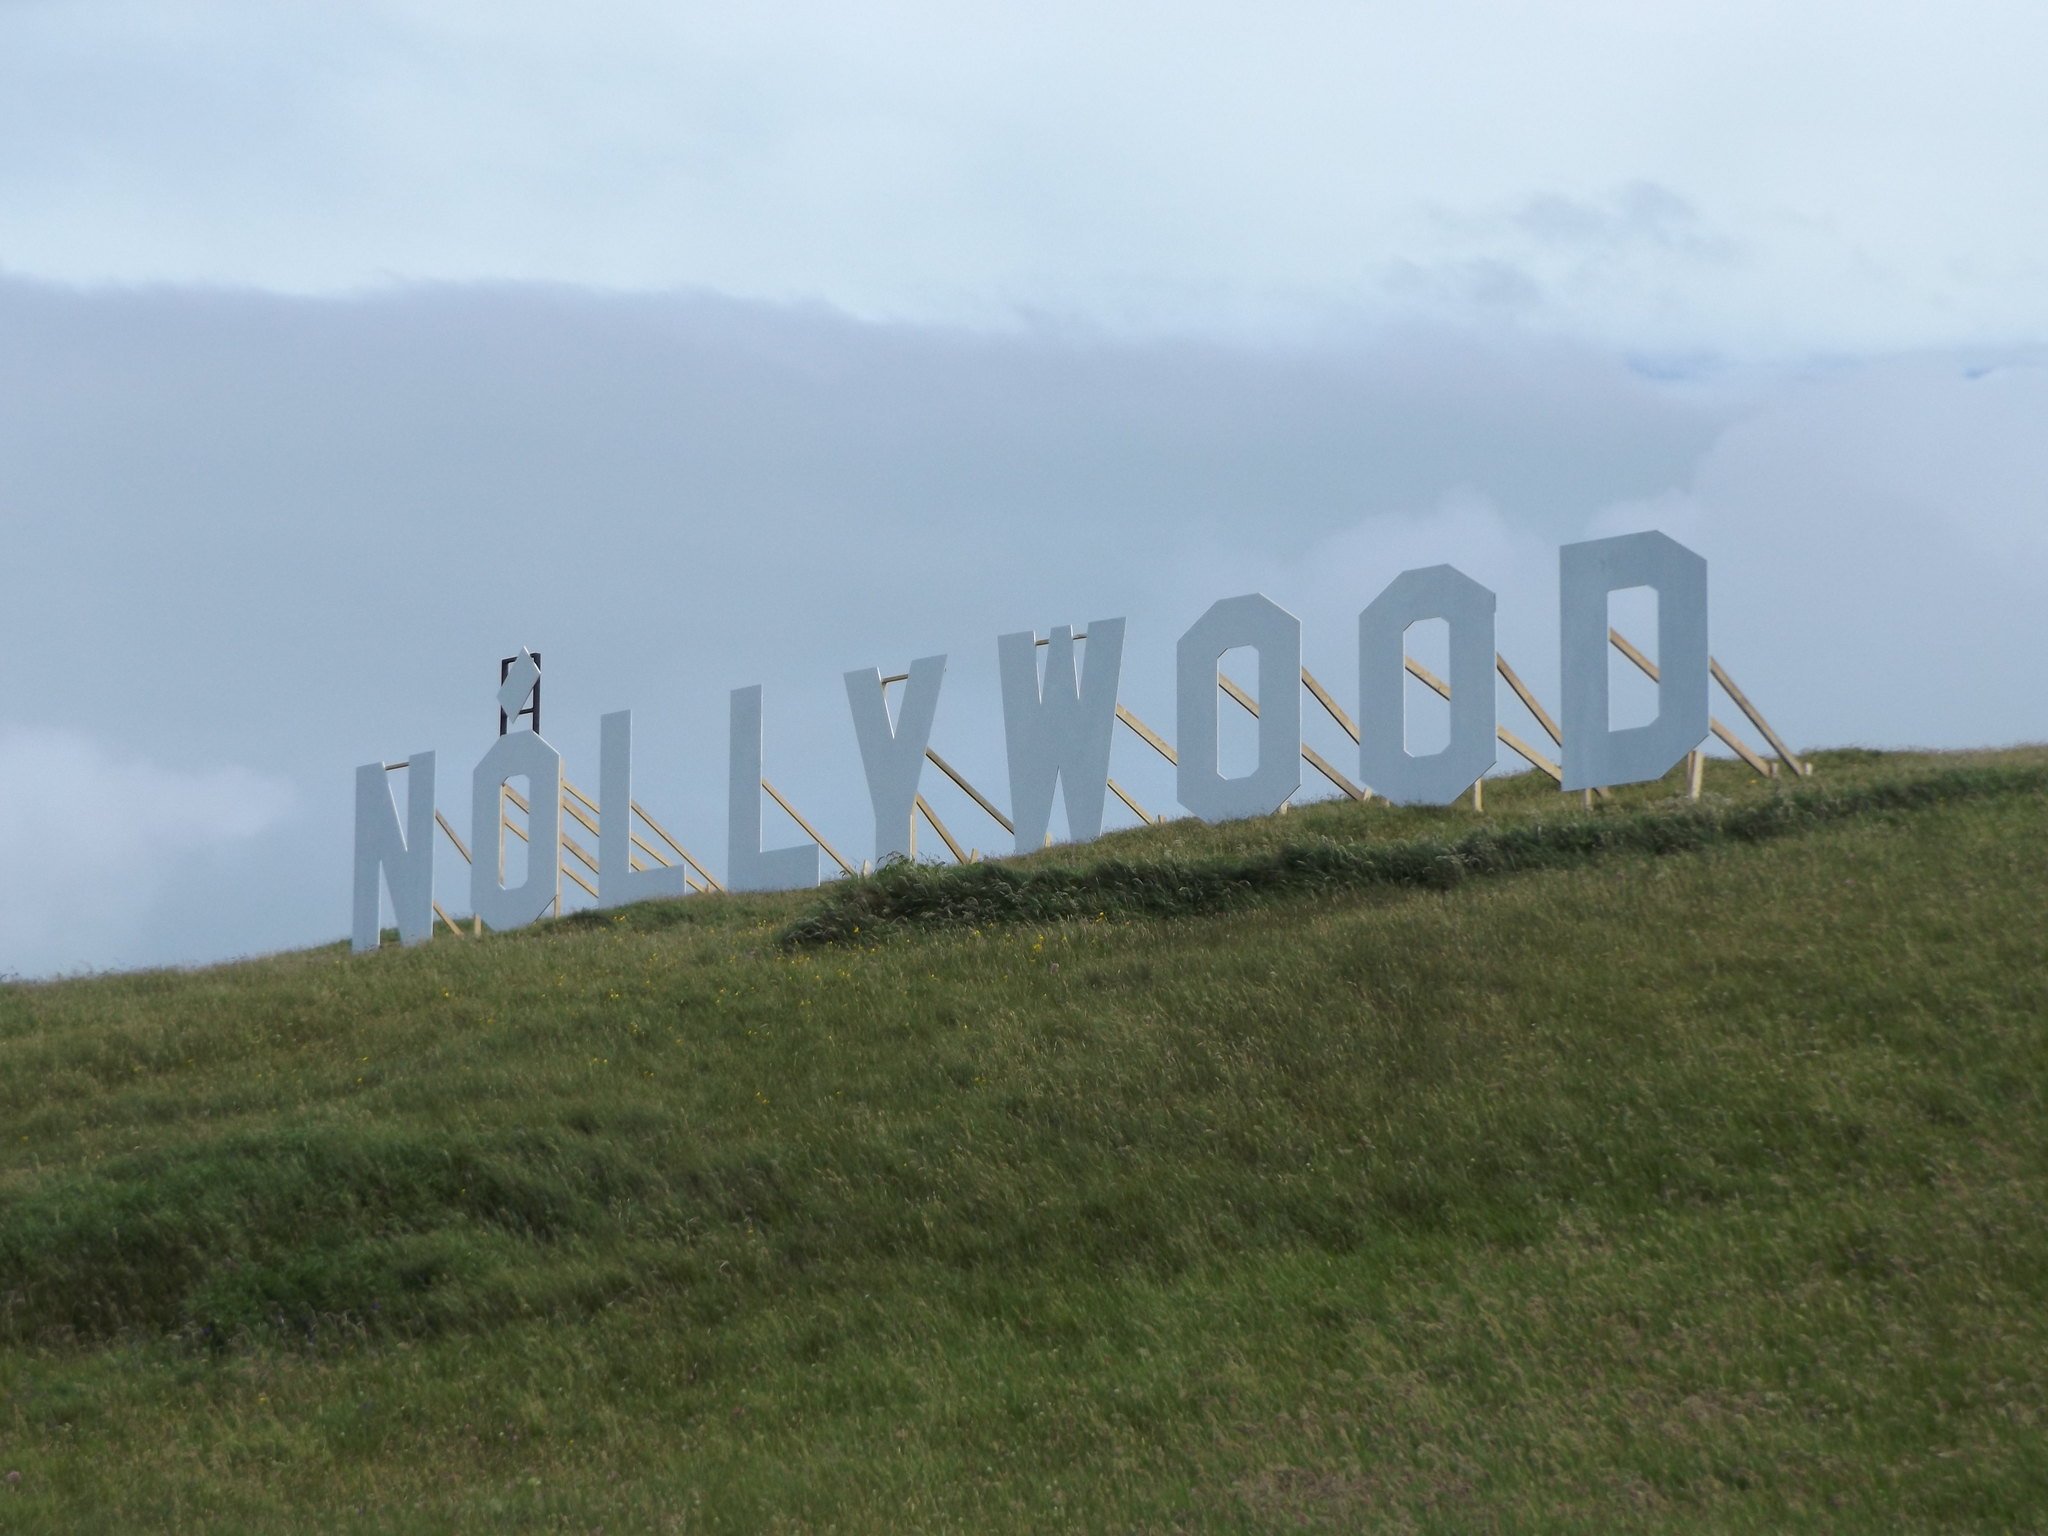 Nollywood Sign above Nólsoy Harbour, Faroe Islands, 15 July 2018